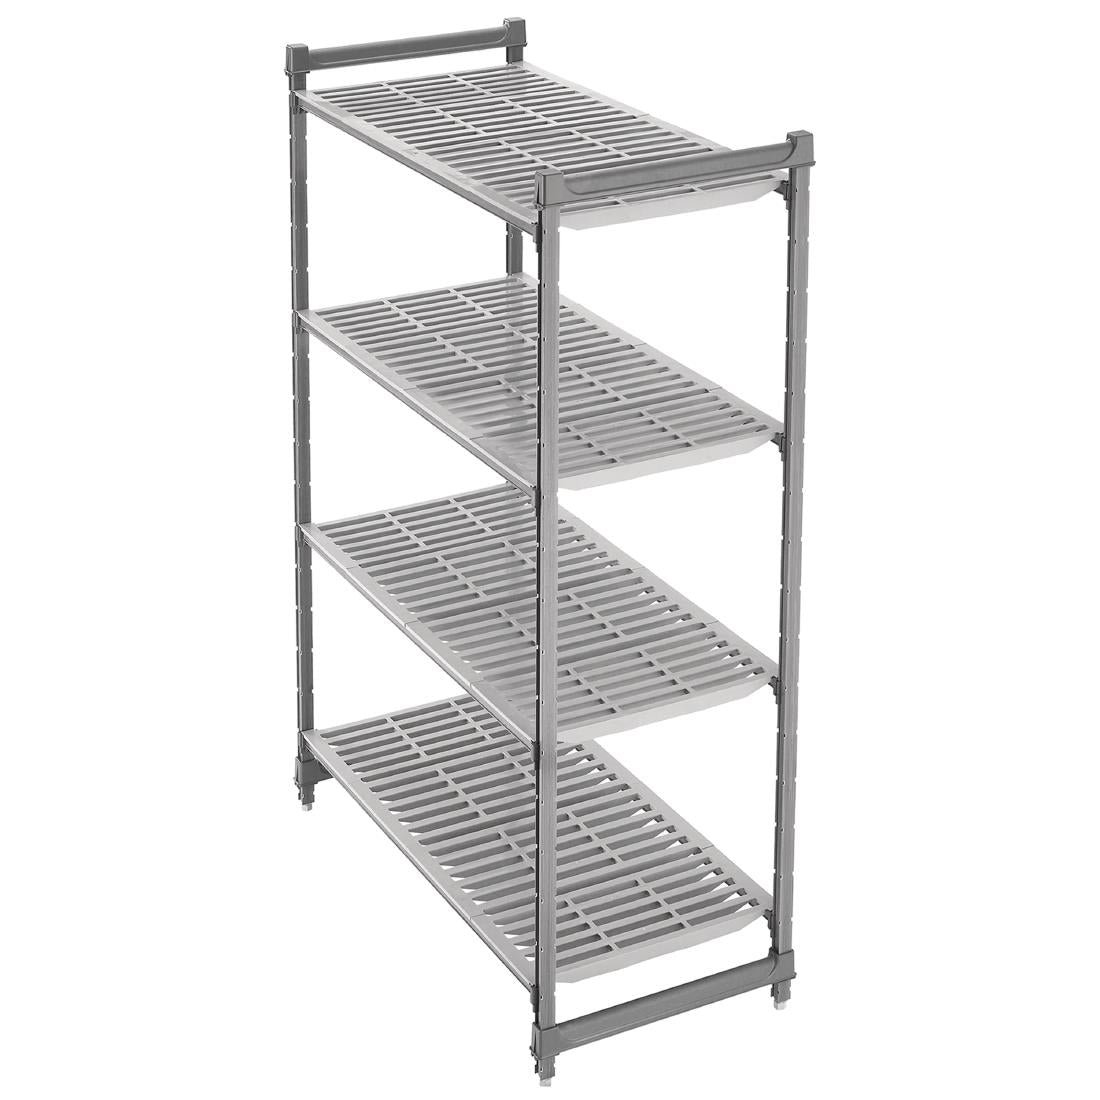 DM774 Cambro Stationary Vented 4 Shelf Starter Units 1830 x 1220 x 610mm JD Catering Equipment Solutions Ltd